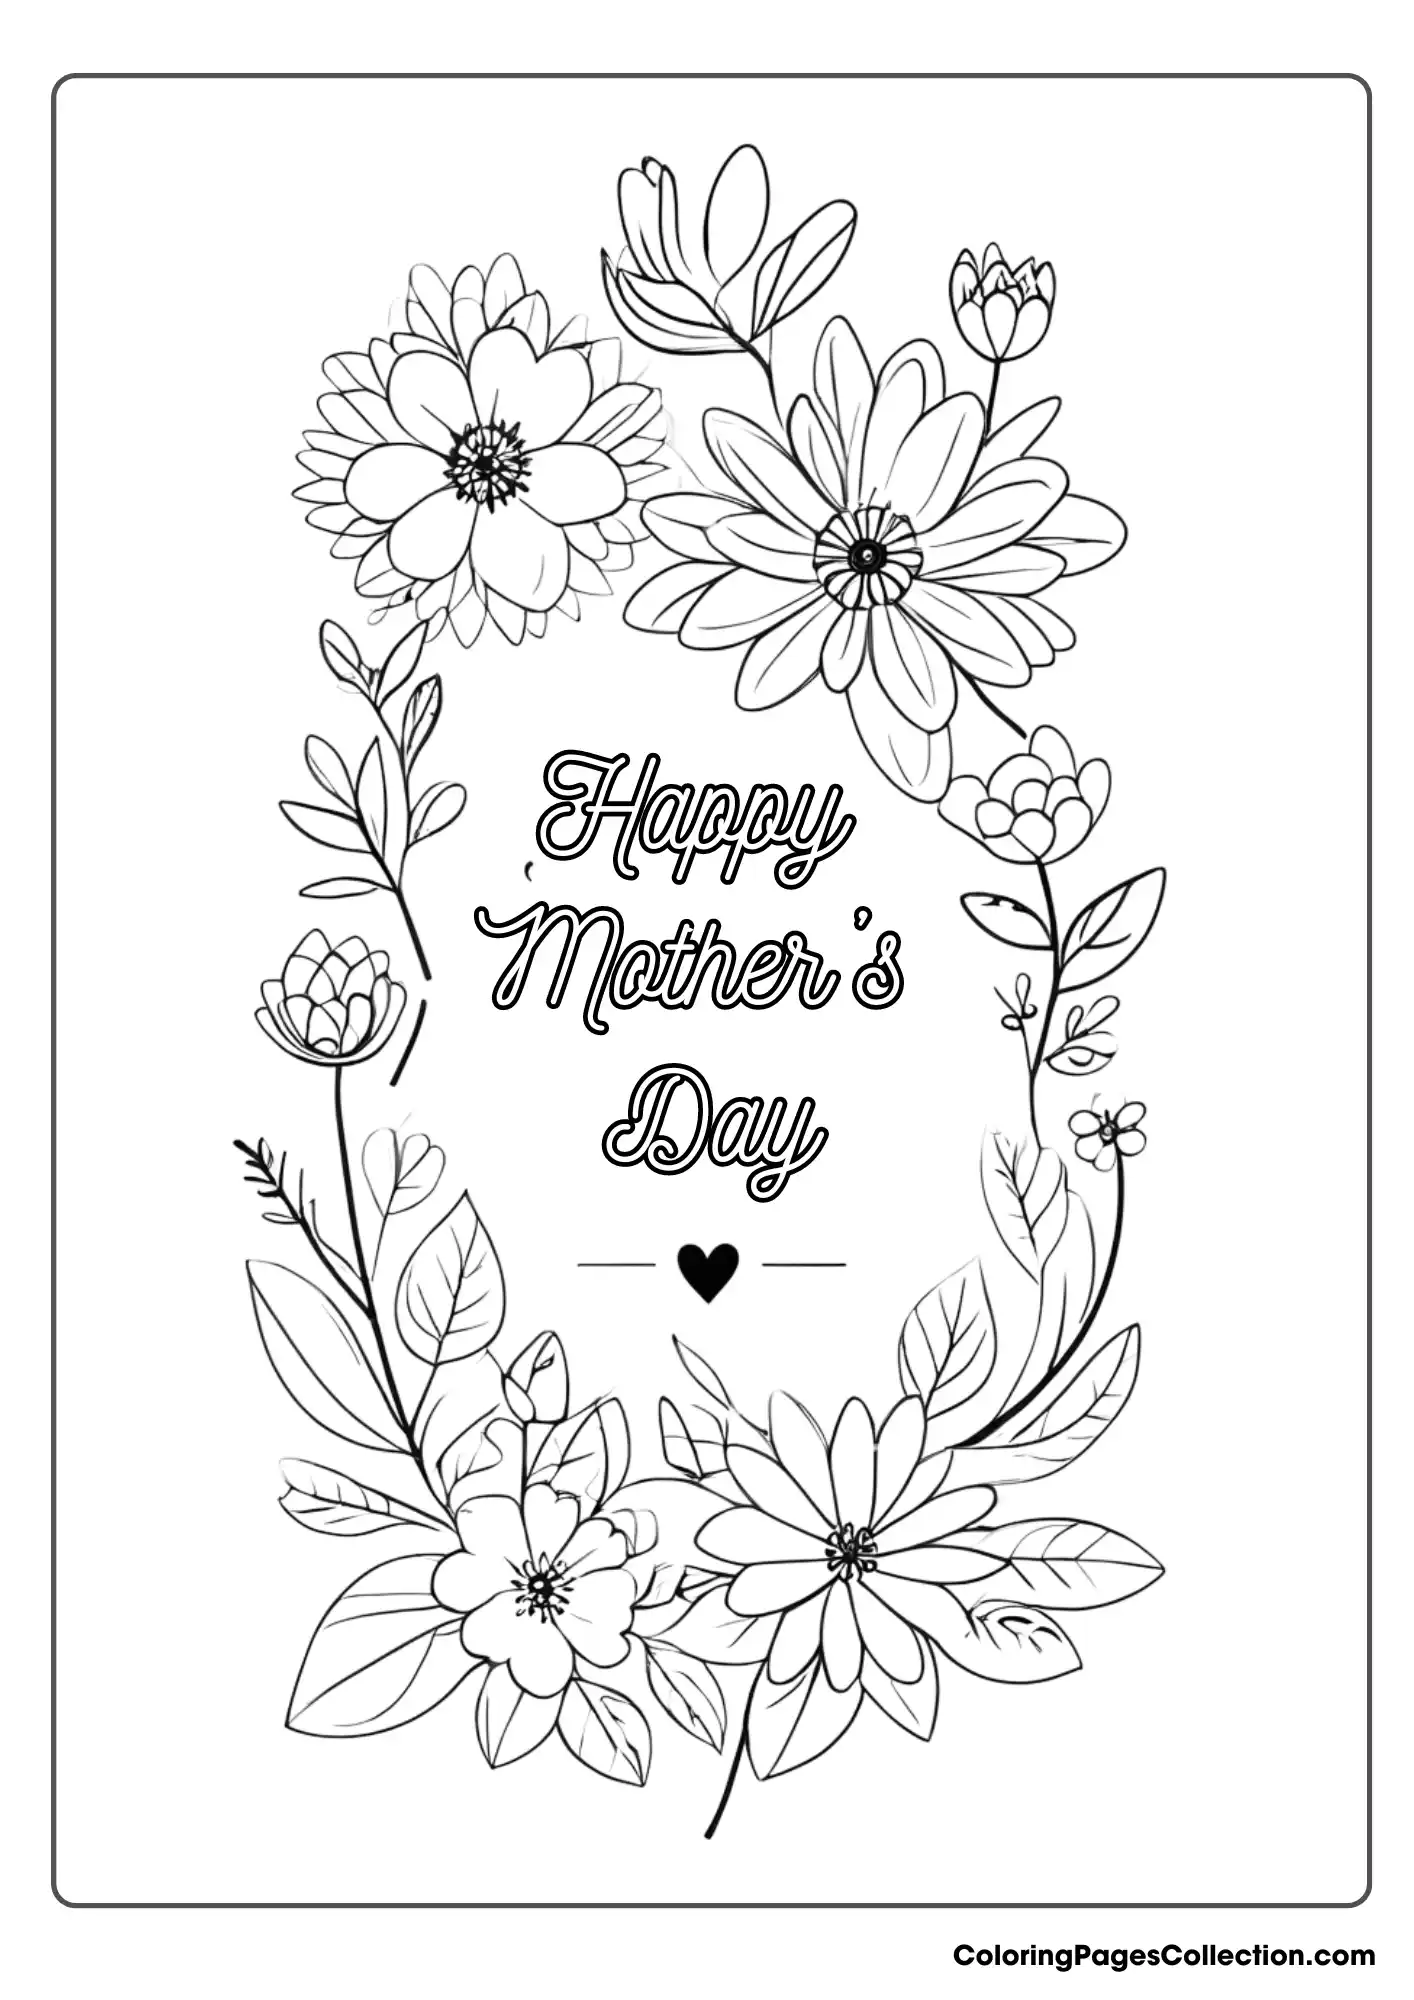 mothers-day-coloring-pages